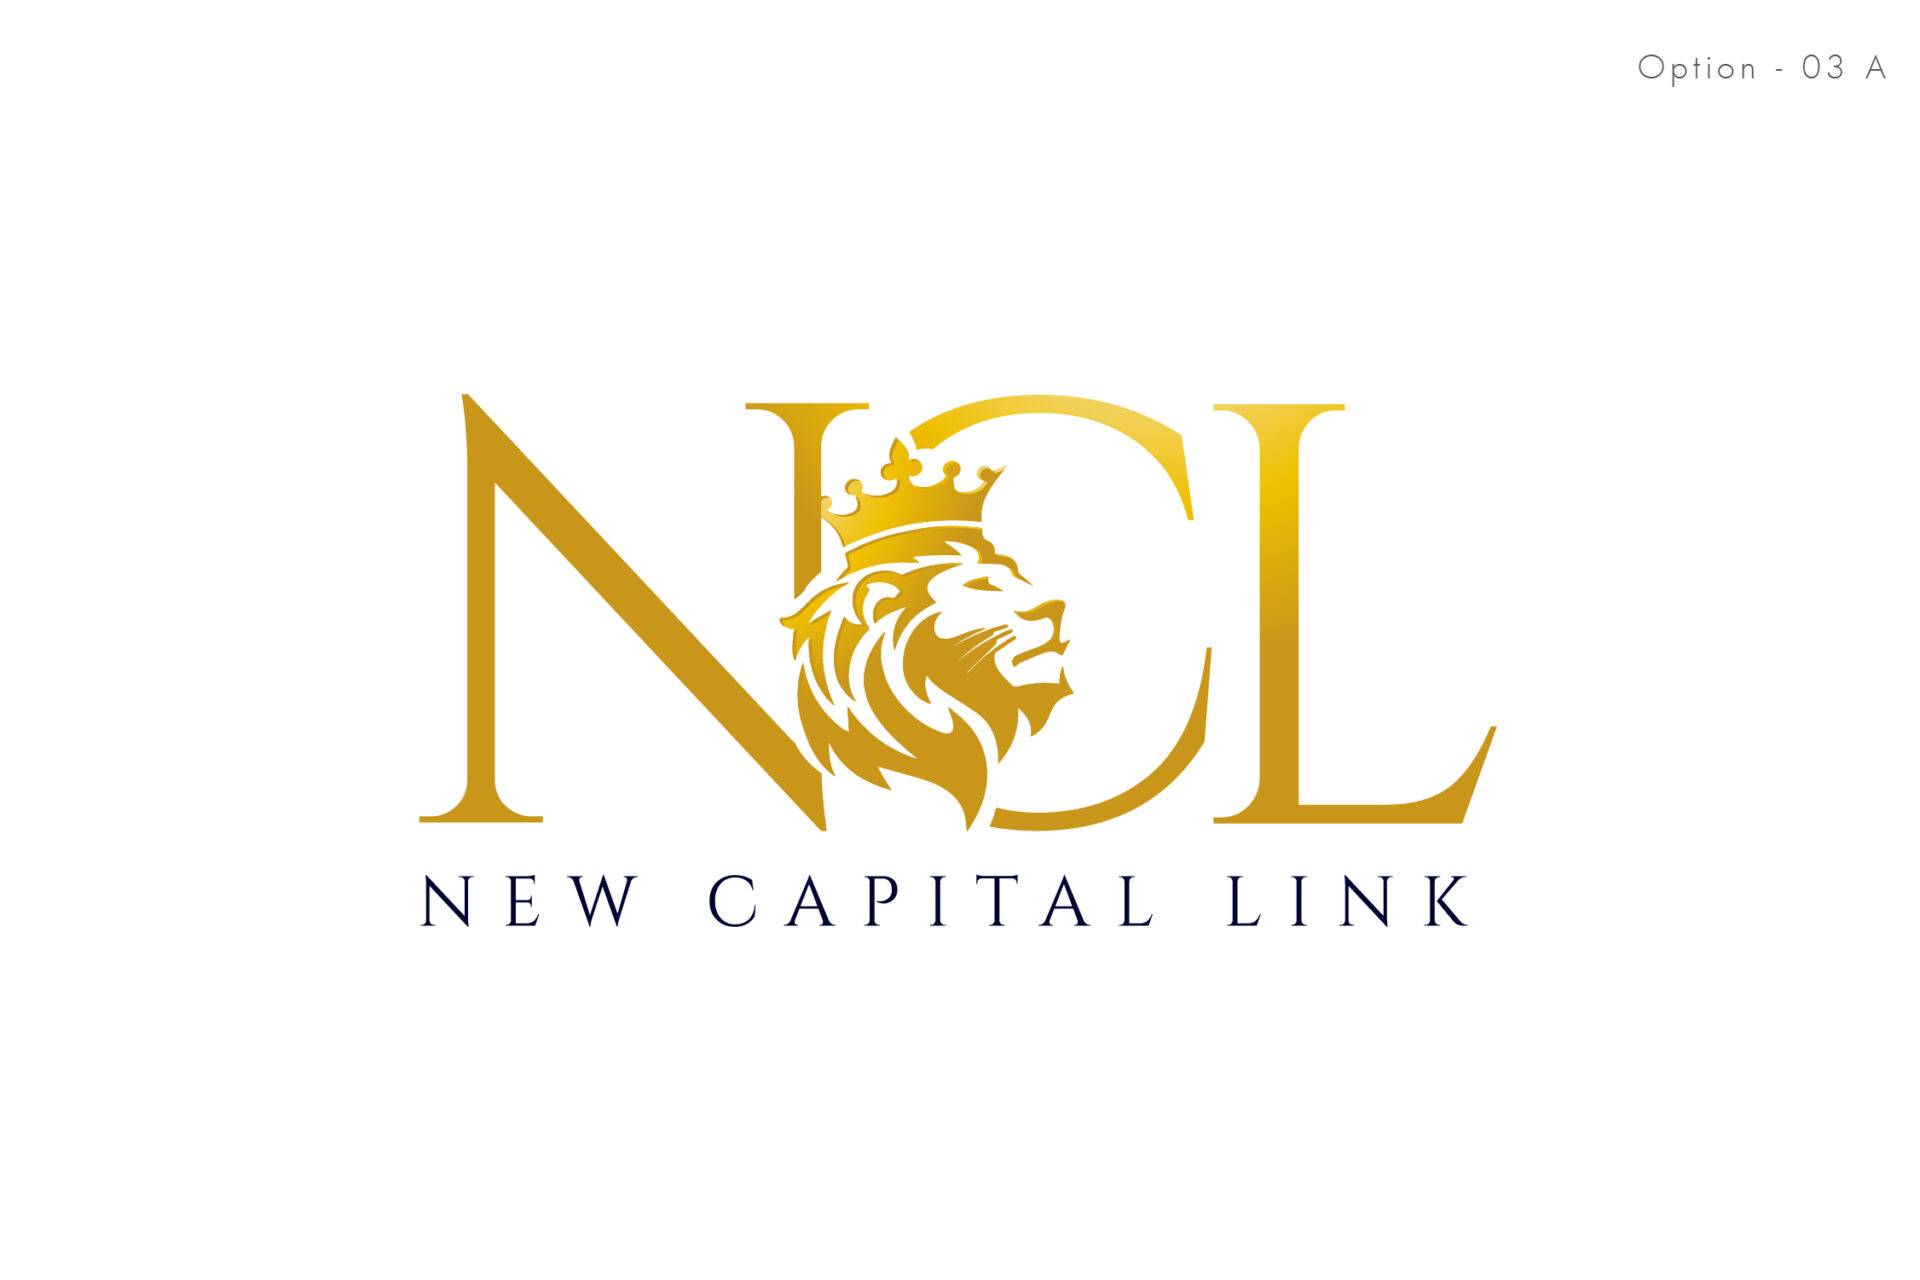 Introducing New Capital Link, The UK’s First Private Wealth-Seeking Capital Provider